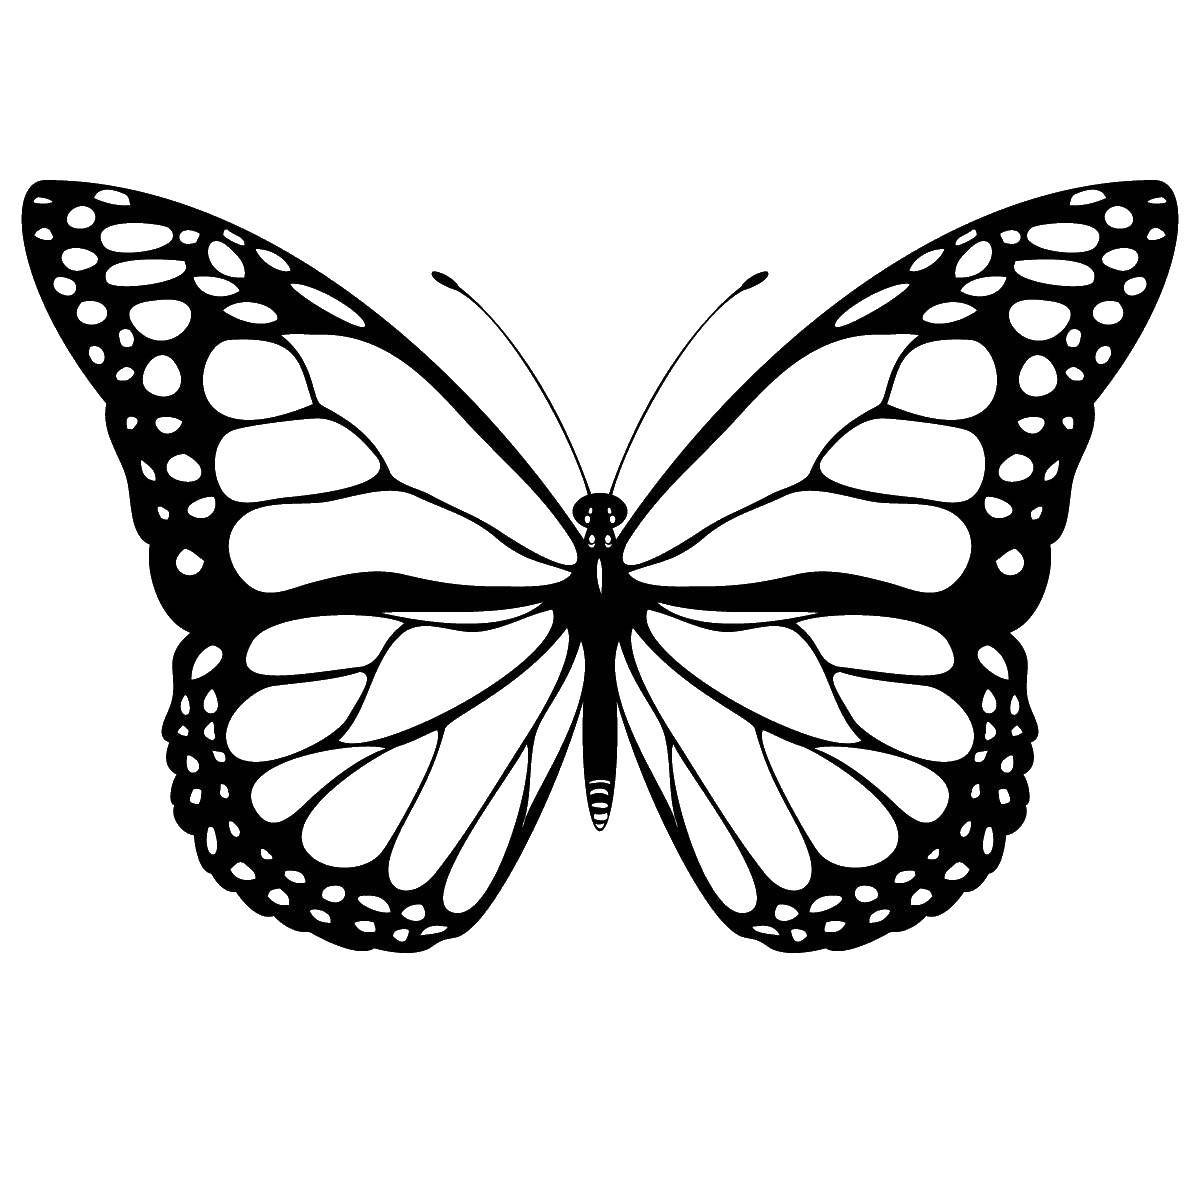 Coloring Butterfly. Category Butterfly. Tags:  insects, butterfly, butterflies, patterns.